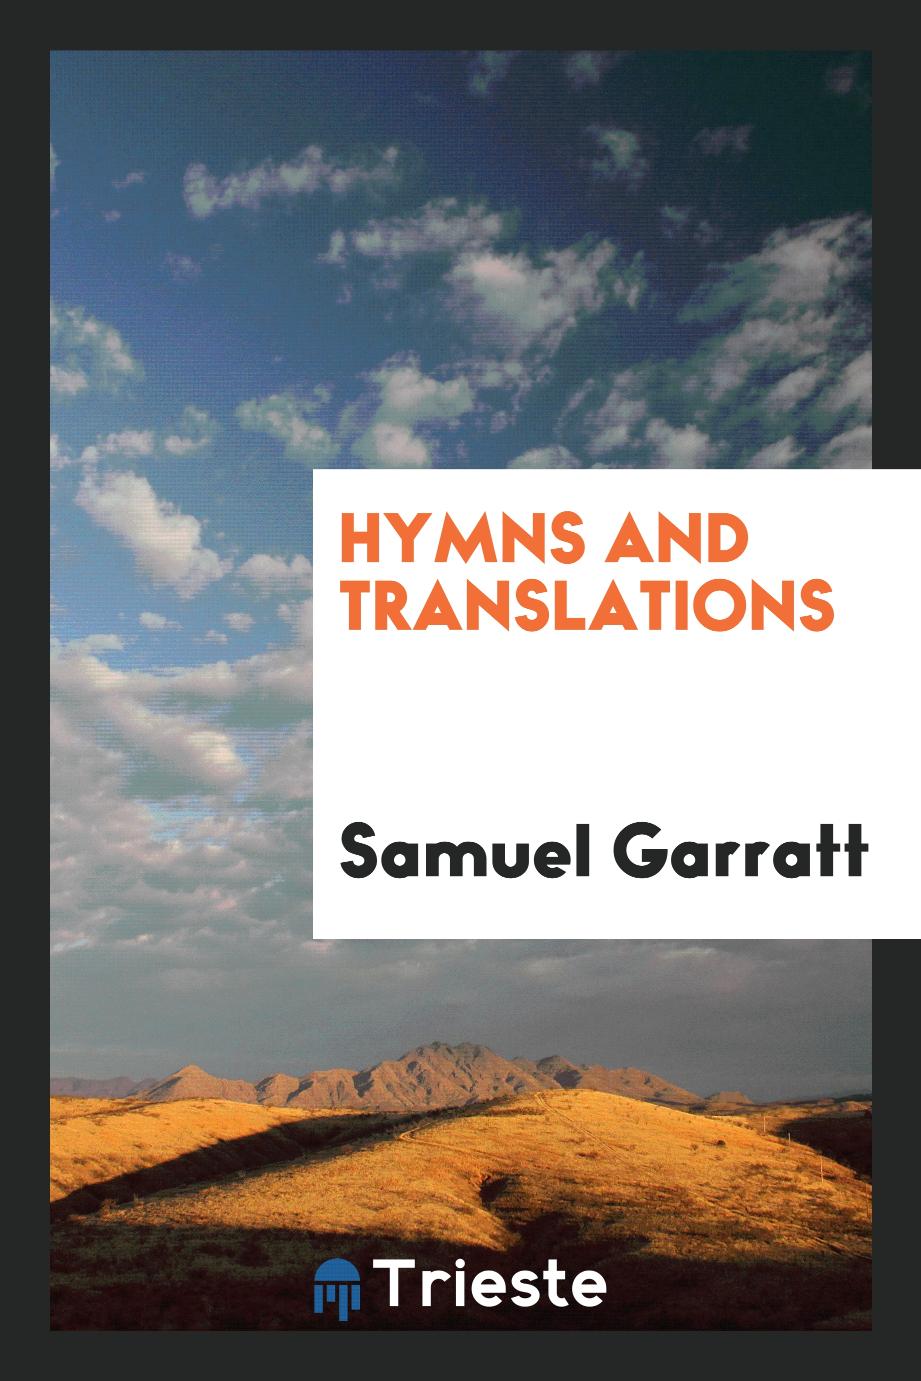 Hymns and translations